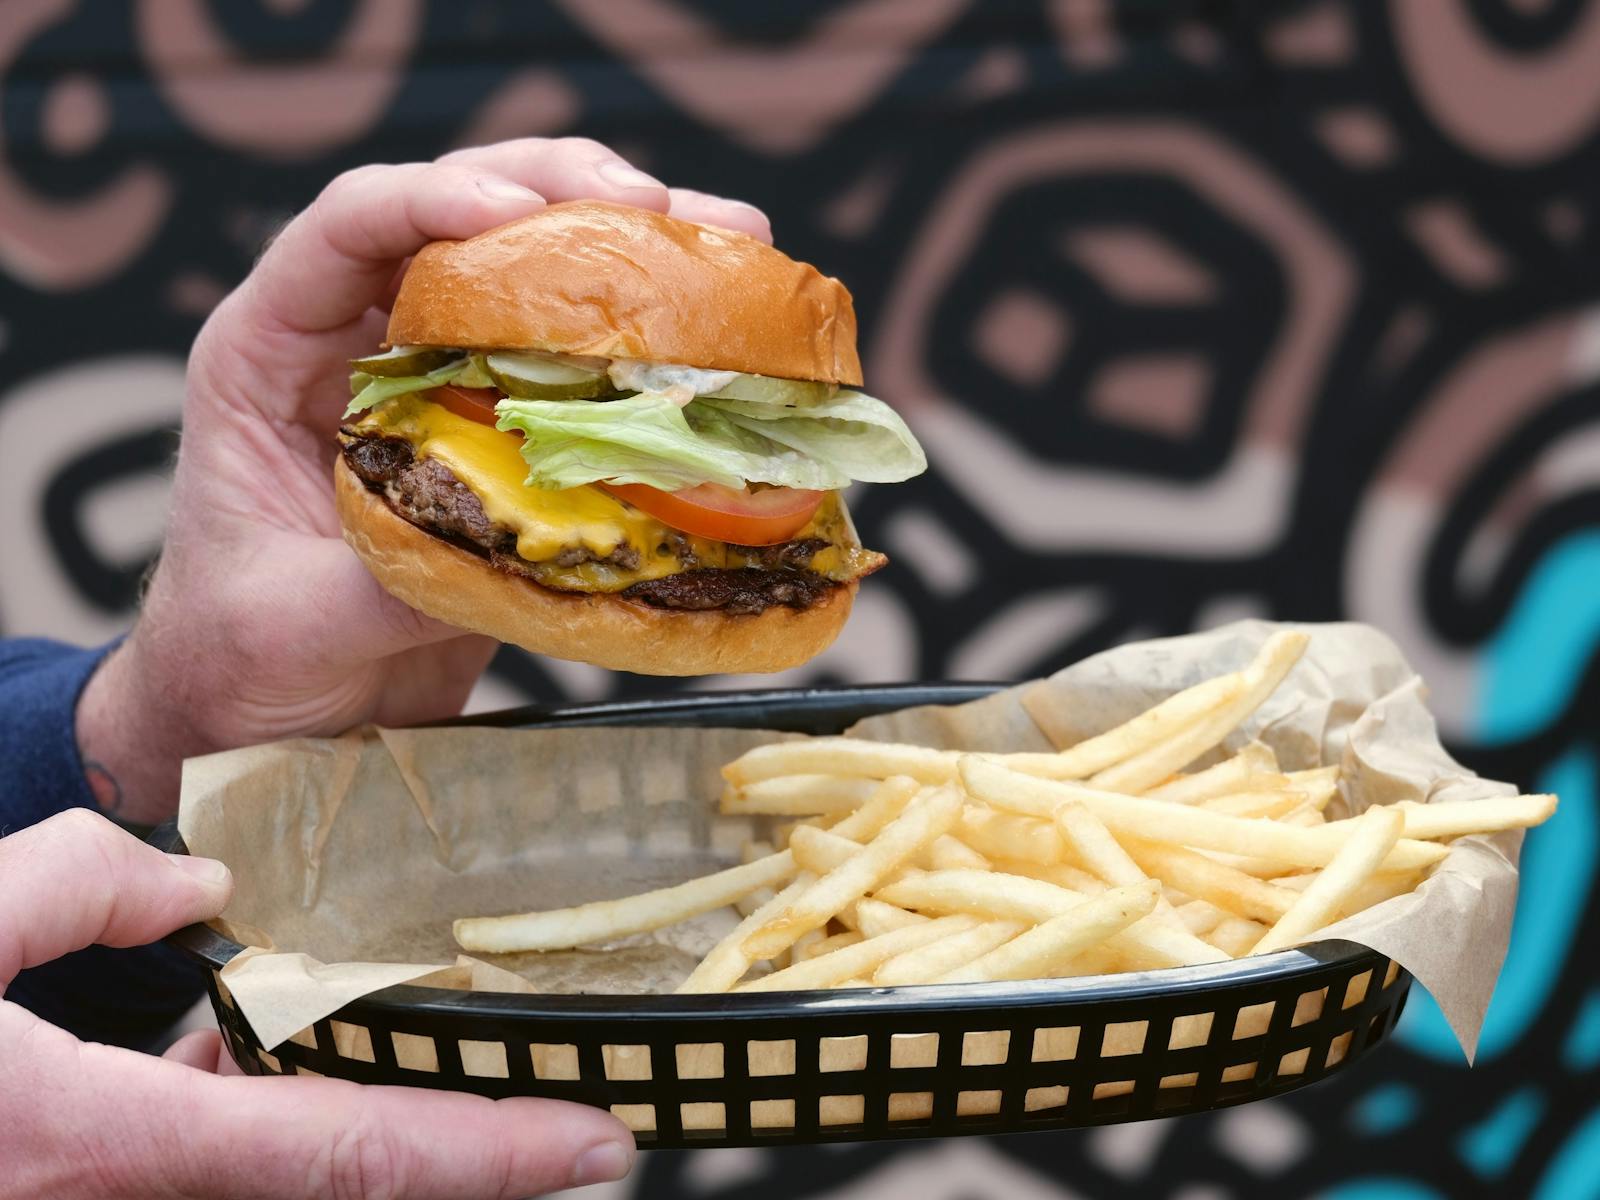 Man's hands holding  double cheeseburger with lettuce and tomato and  black plastic basket of fries